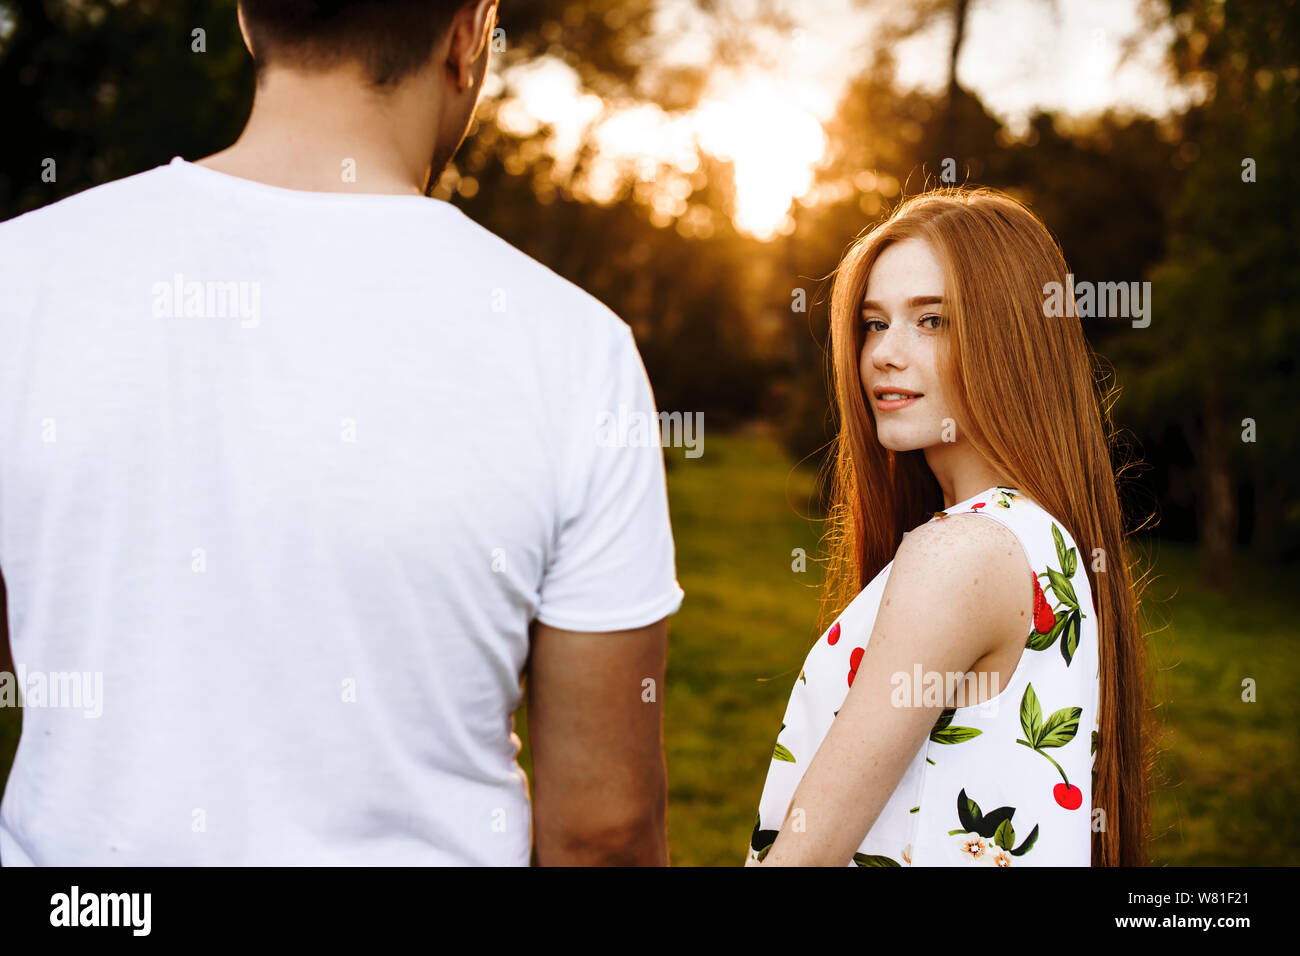 Beautiful red haired woman with freckles looking at camera smiling while holding hand of her boyfriend against sunset while dating outside in the park Stock Photo